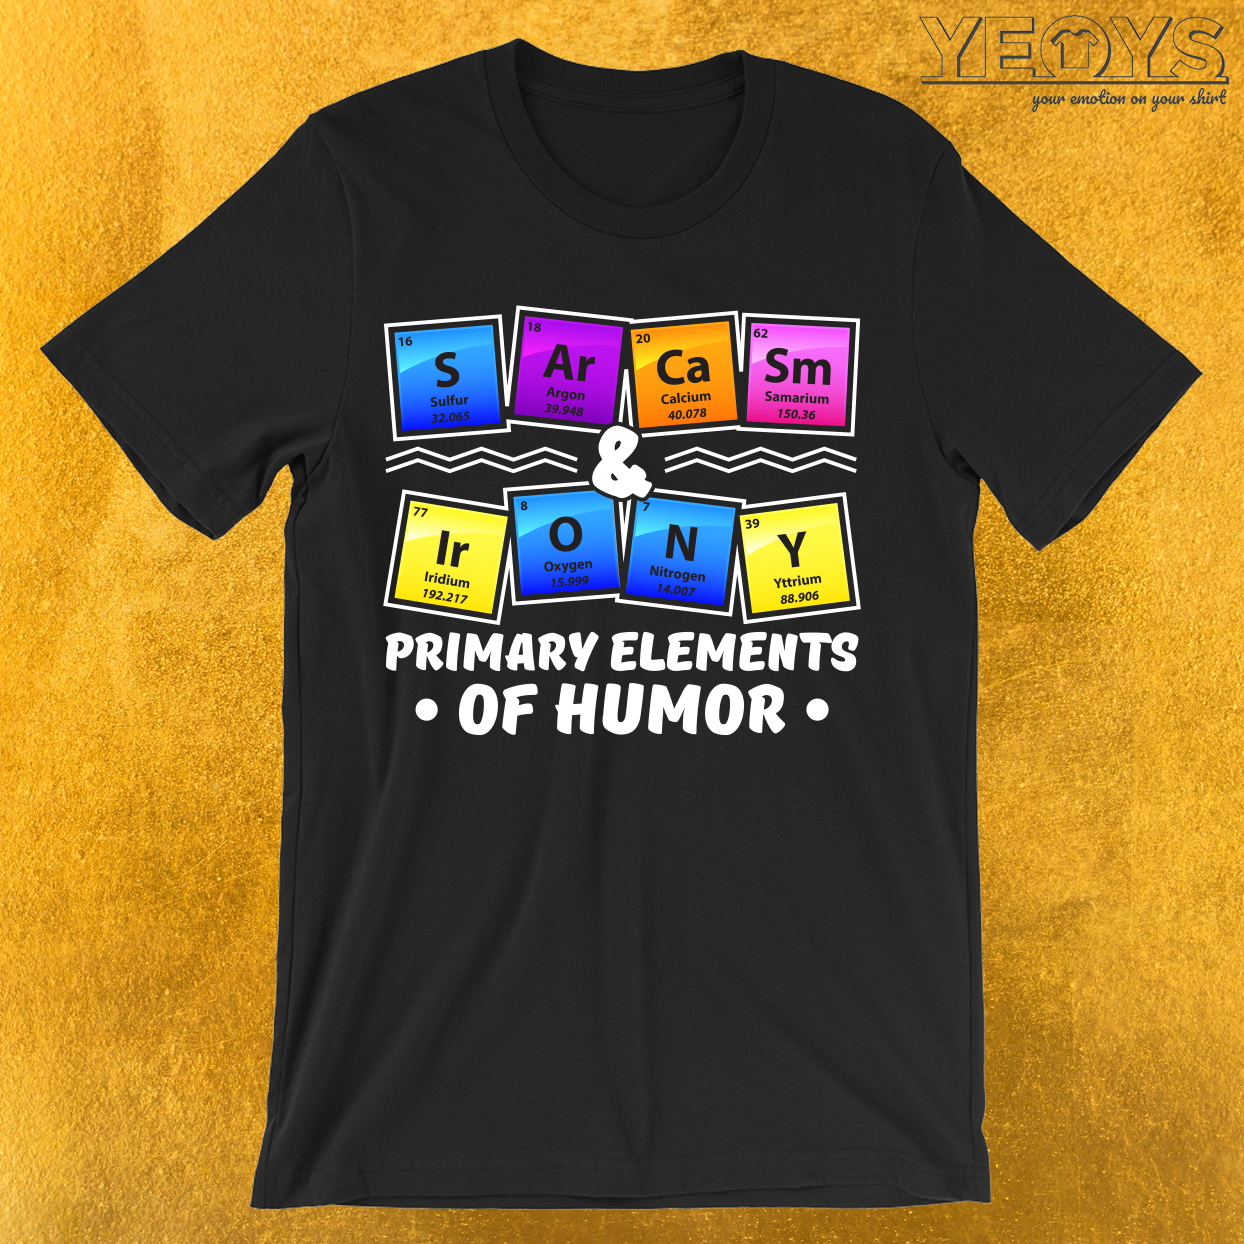 Sarcasm & Irony Primary Elements Of Humor T-Shirt